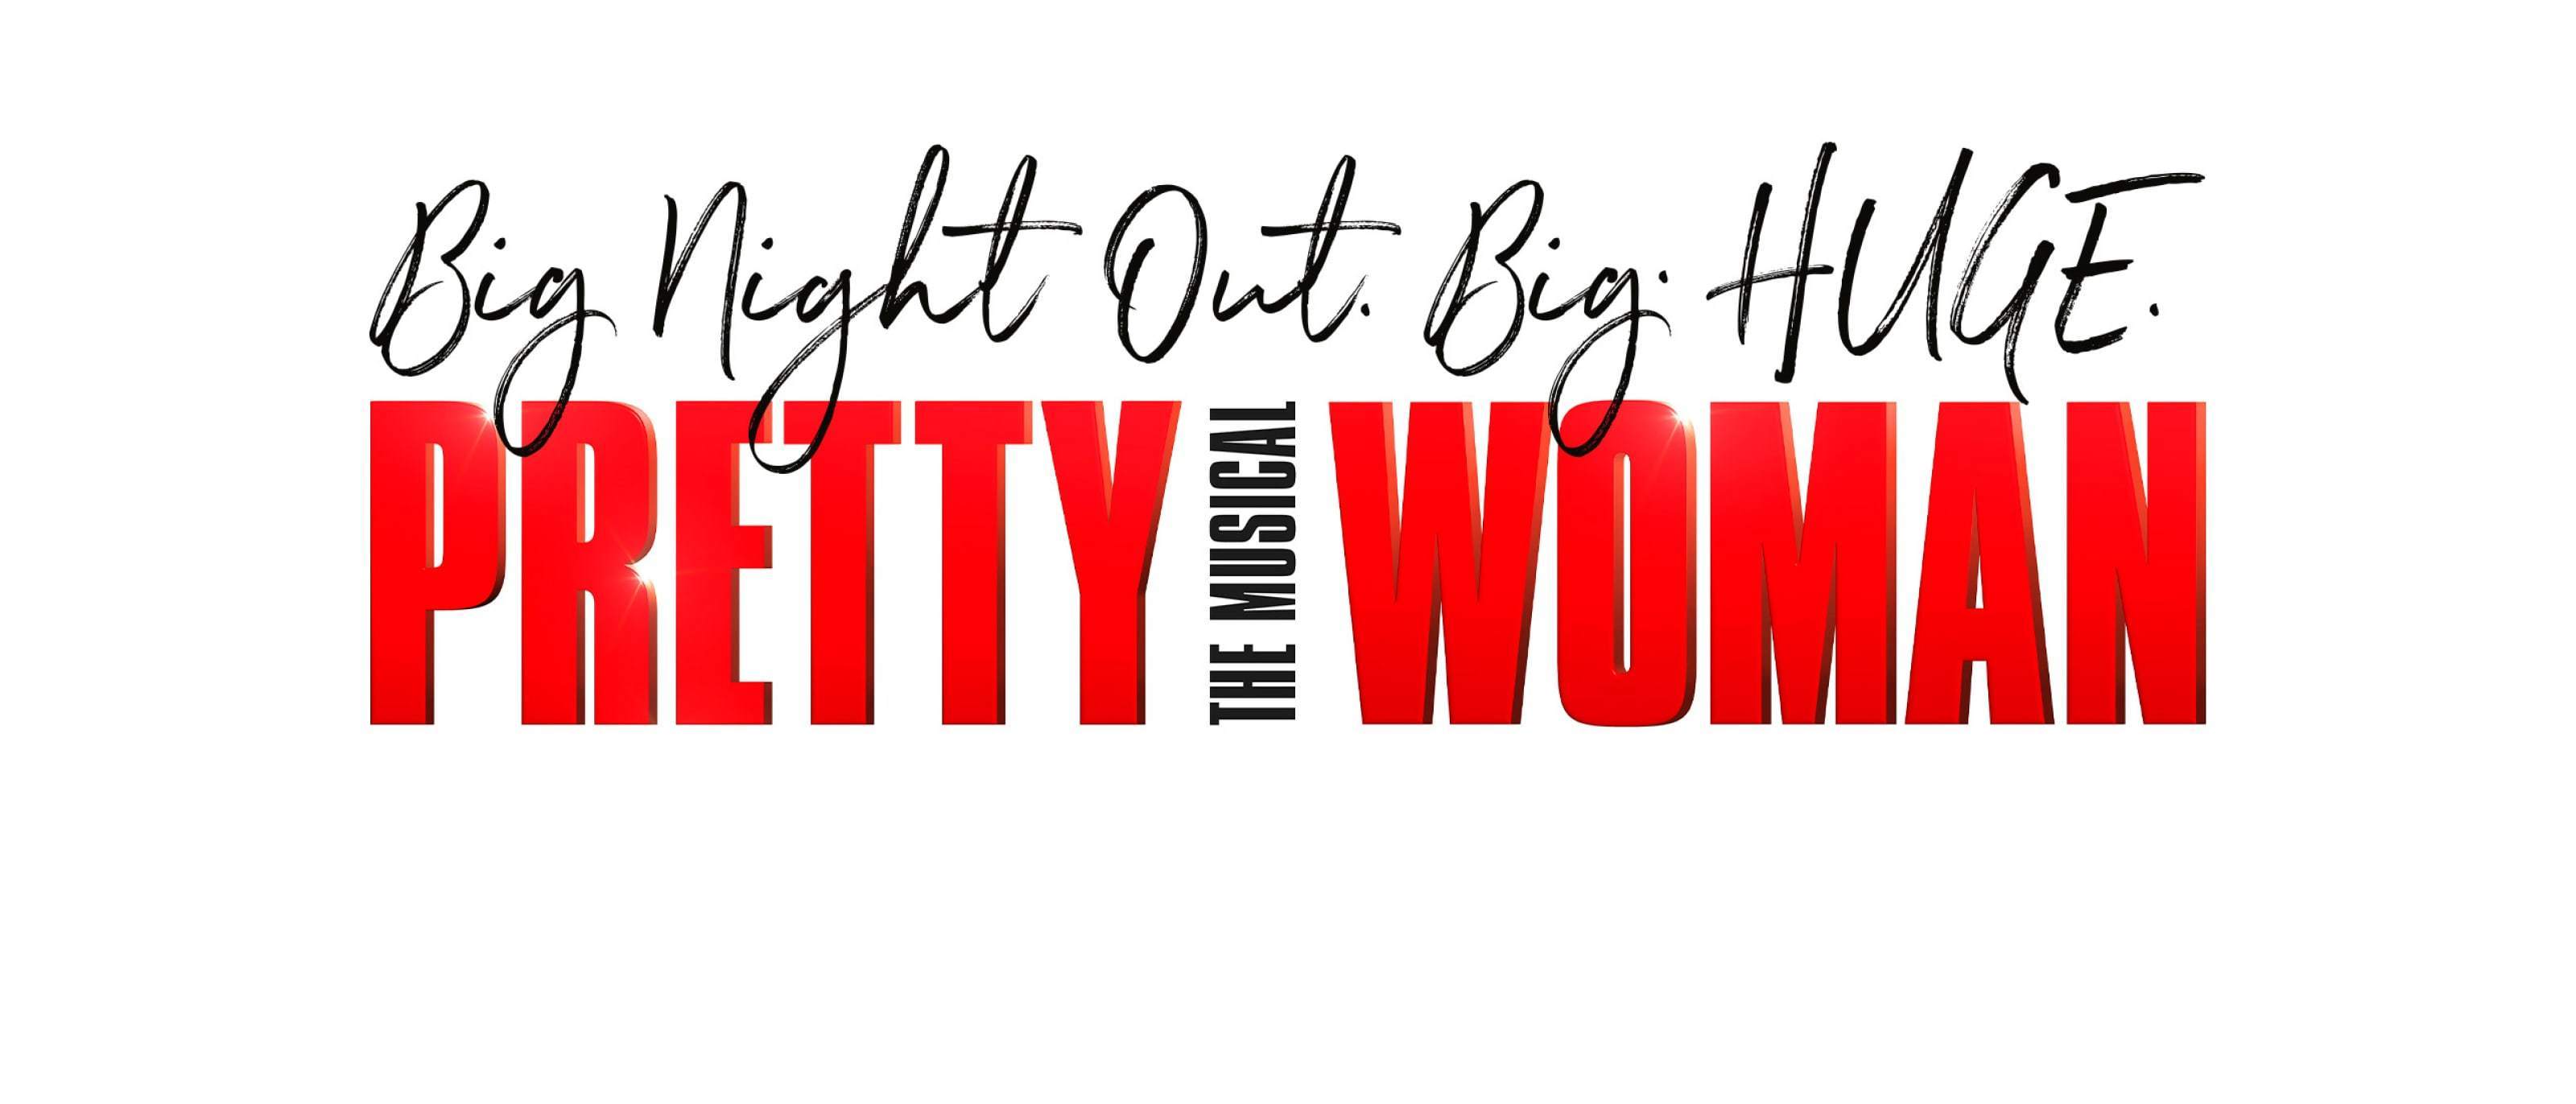 Buy tickets for Pretty Woman the Musical with Disney Tickets